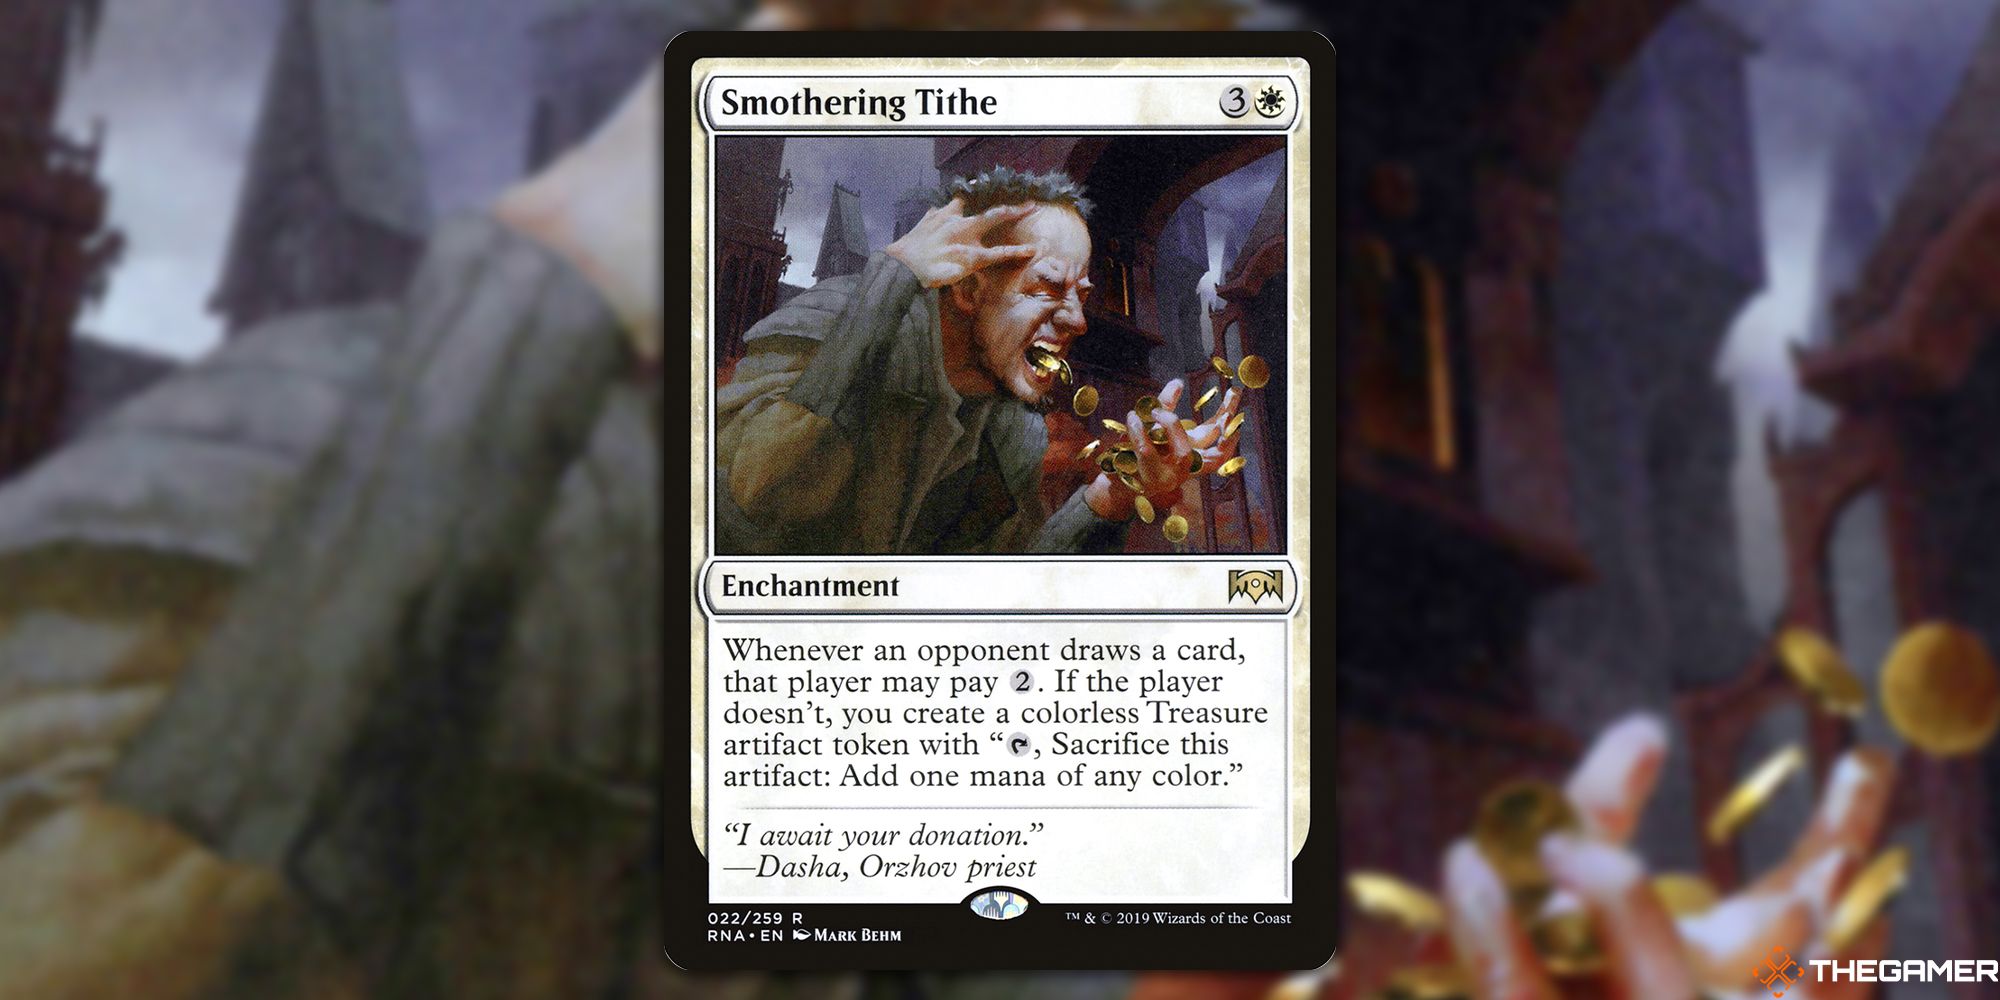  Image of the Smothering Tithe card in Magic: The Gathering, with art by Mark Behm